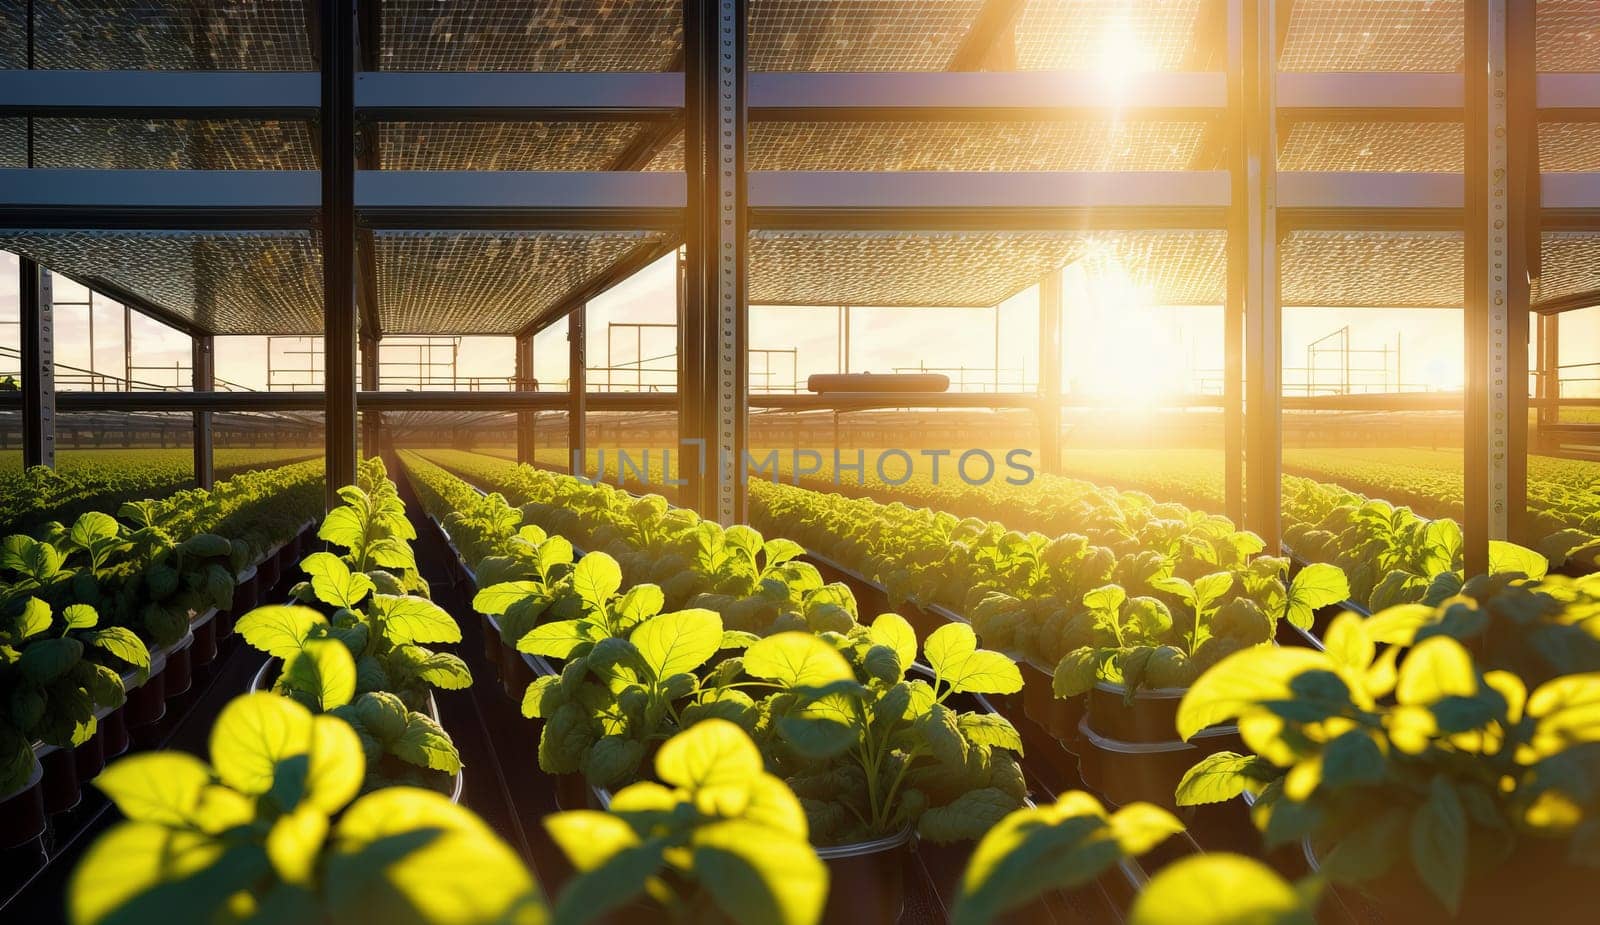 Sunlight shines on flowers in a greenhouse filled with plants by DCStudio